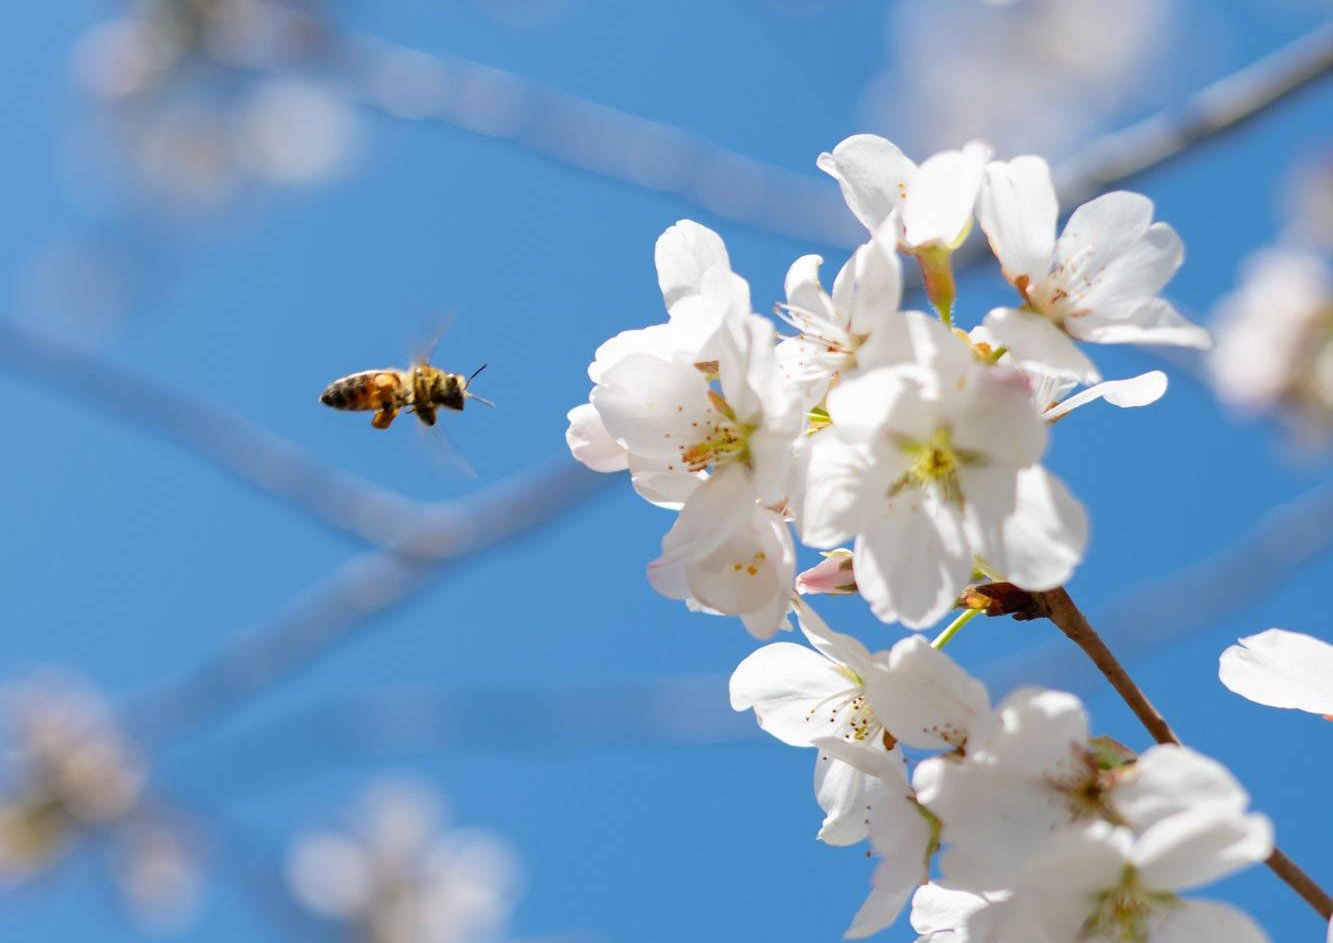 A bee gathers nectar from a cherry blossom along the Hocking River in Athens, Ohio.